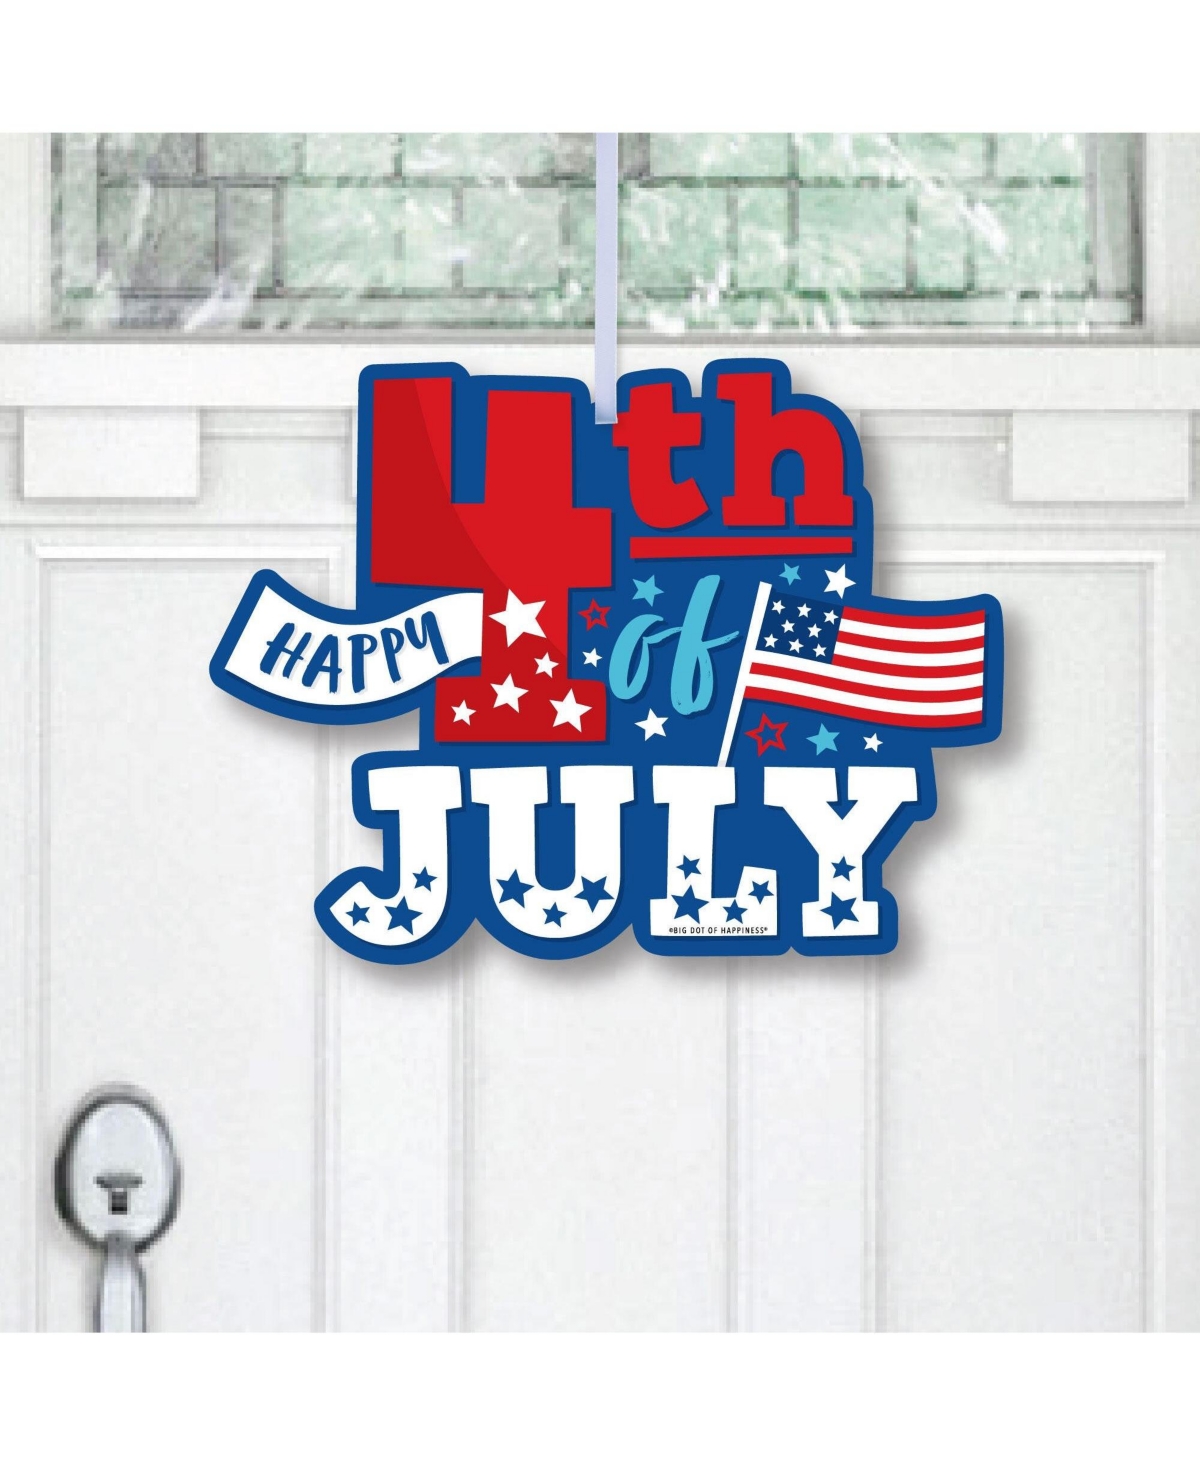 Firecracker 4th of July - Hanging Porch Outdoor Front Door Decor - 1 Pc Sign